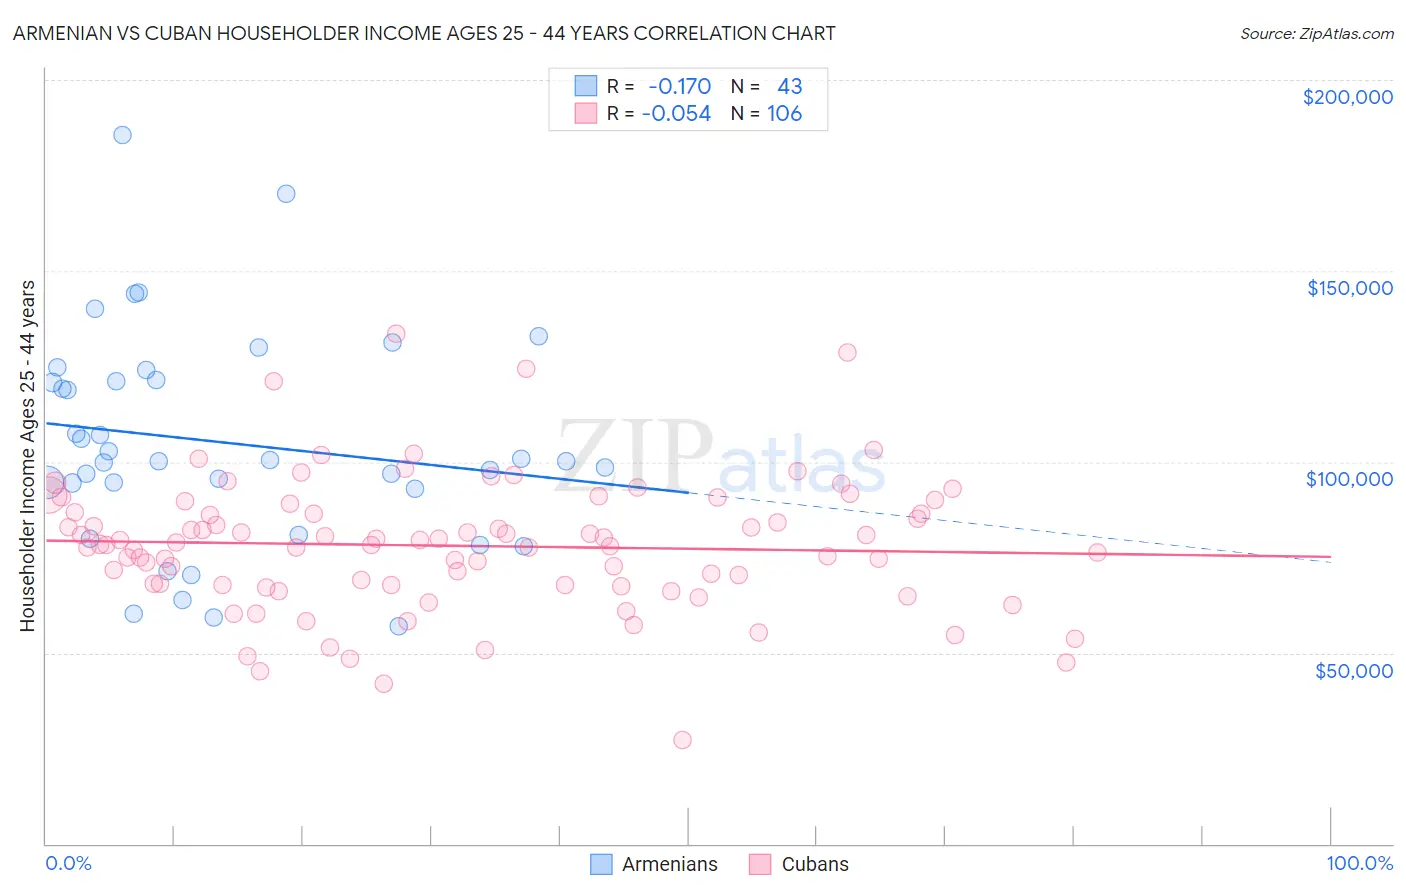 Armenian vs Cuban Householder Income Ages 25 - 44 years